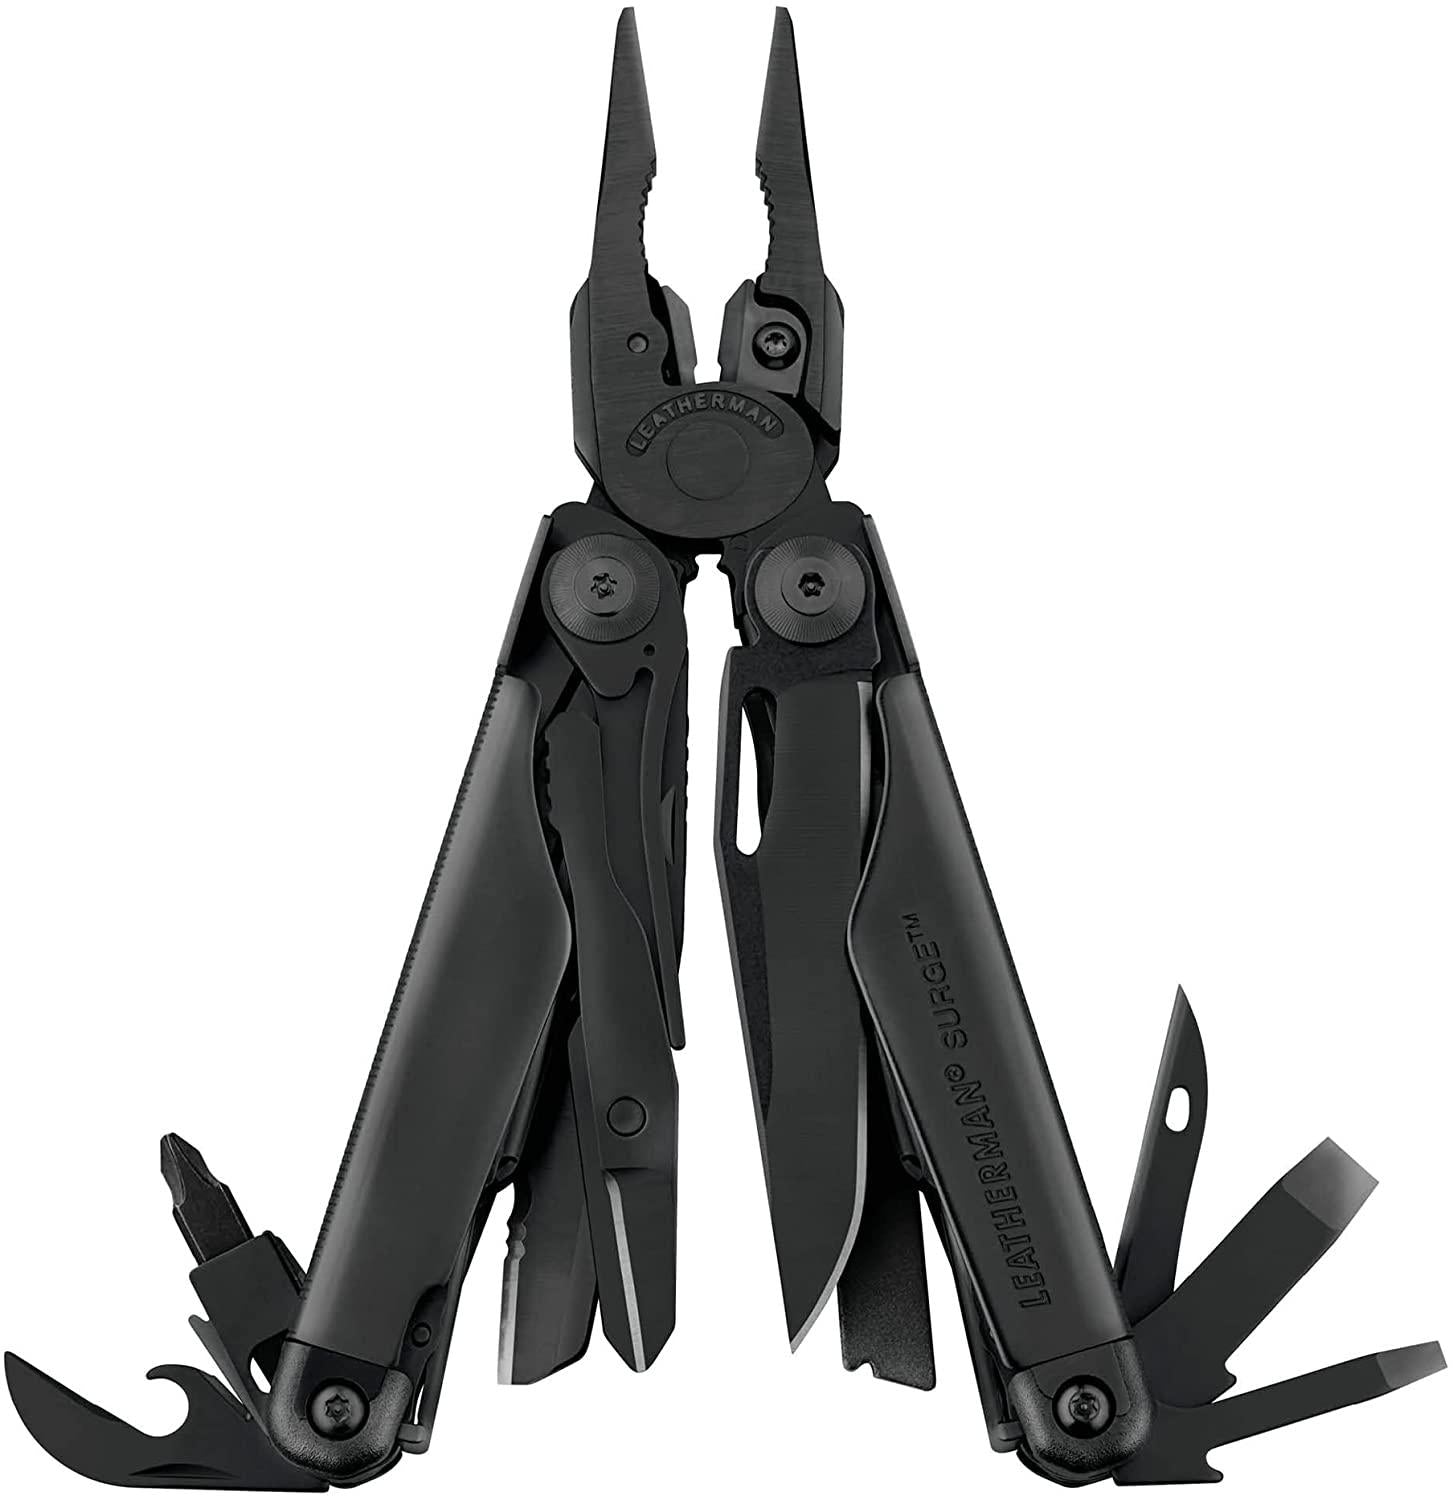 Leatherman, LEATHERMAN - 830278, Surge Heavy Duty Multitool with Premium Replaceable Wire Cutters and Spring-Action Scissors, Black with MOLLE Sheath